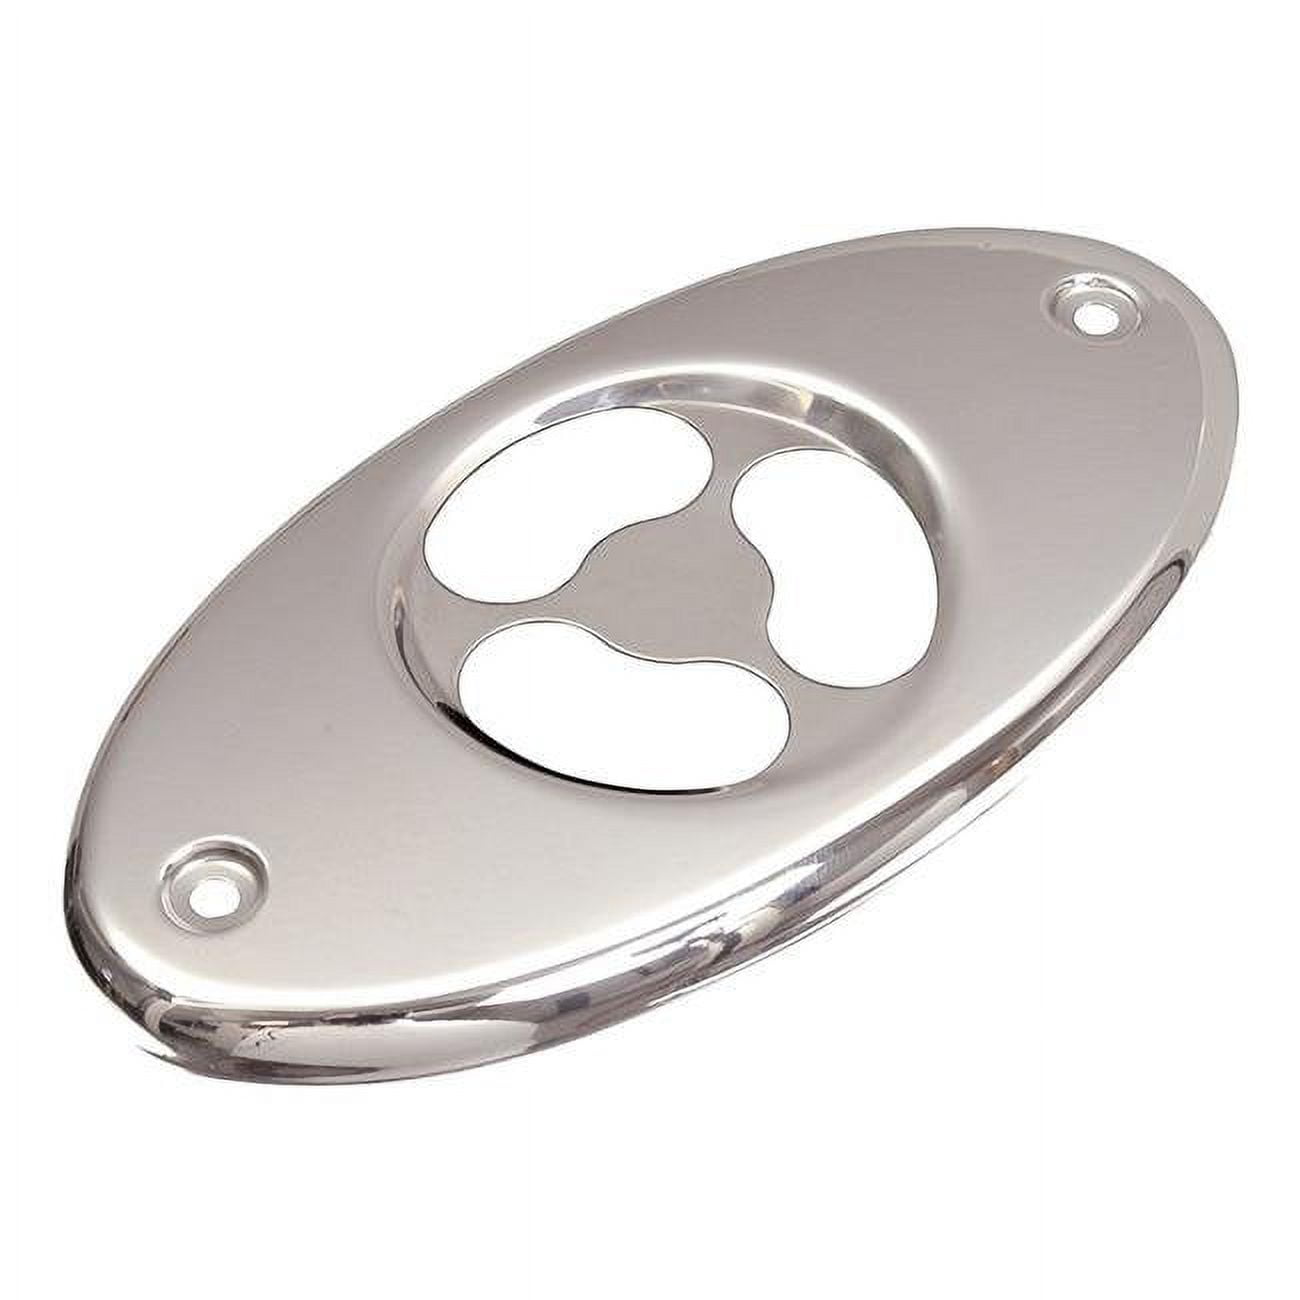 Boat Horn, 120 dB, Stainless Steel Cover, 12V - FO600